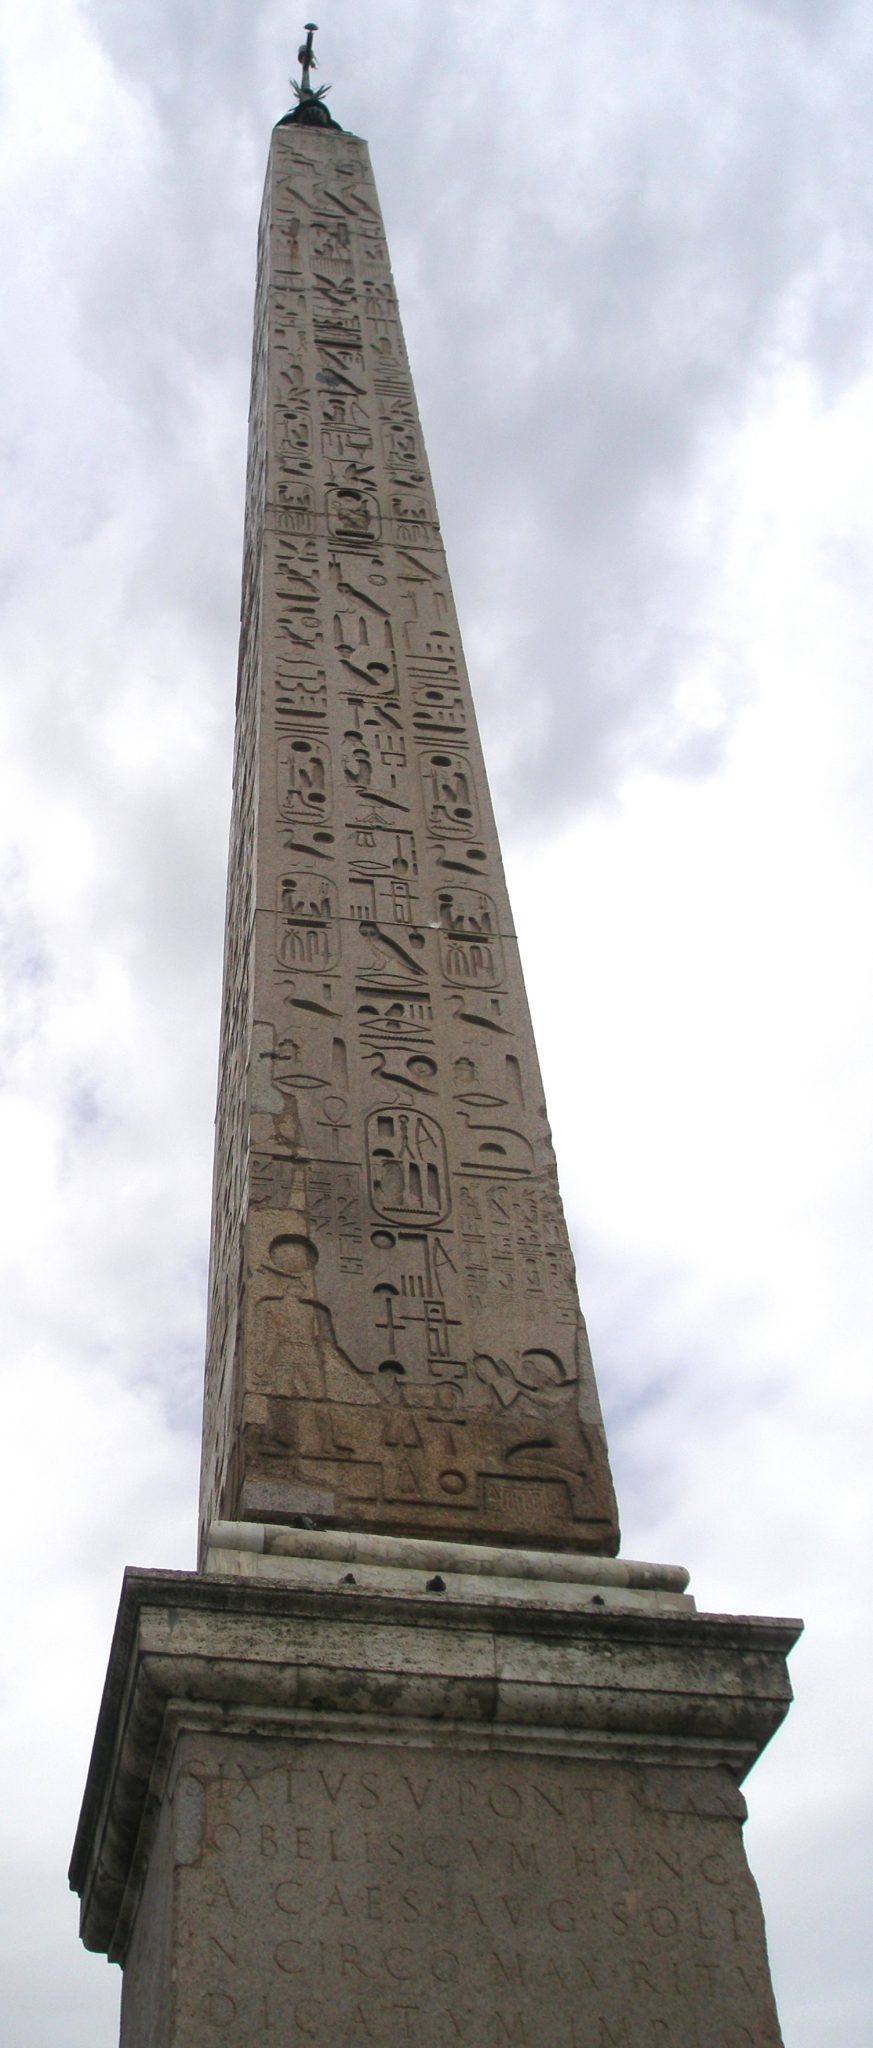 The 78-foot-high Egyptian Obelisk, at the center of Piazza del Popolo.